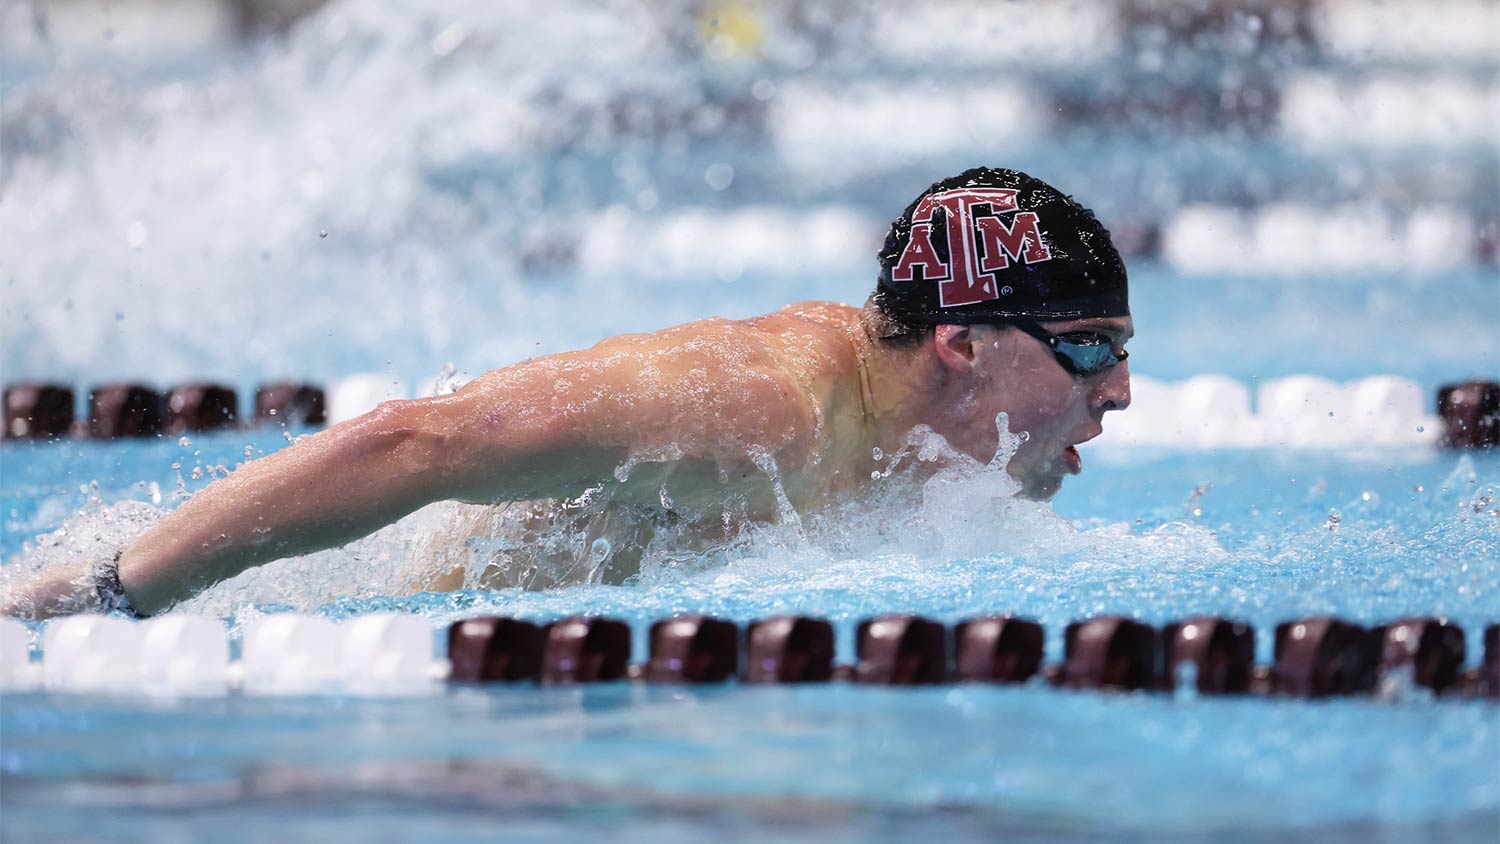 A Texas A&M swimmer comes up for breath during the race